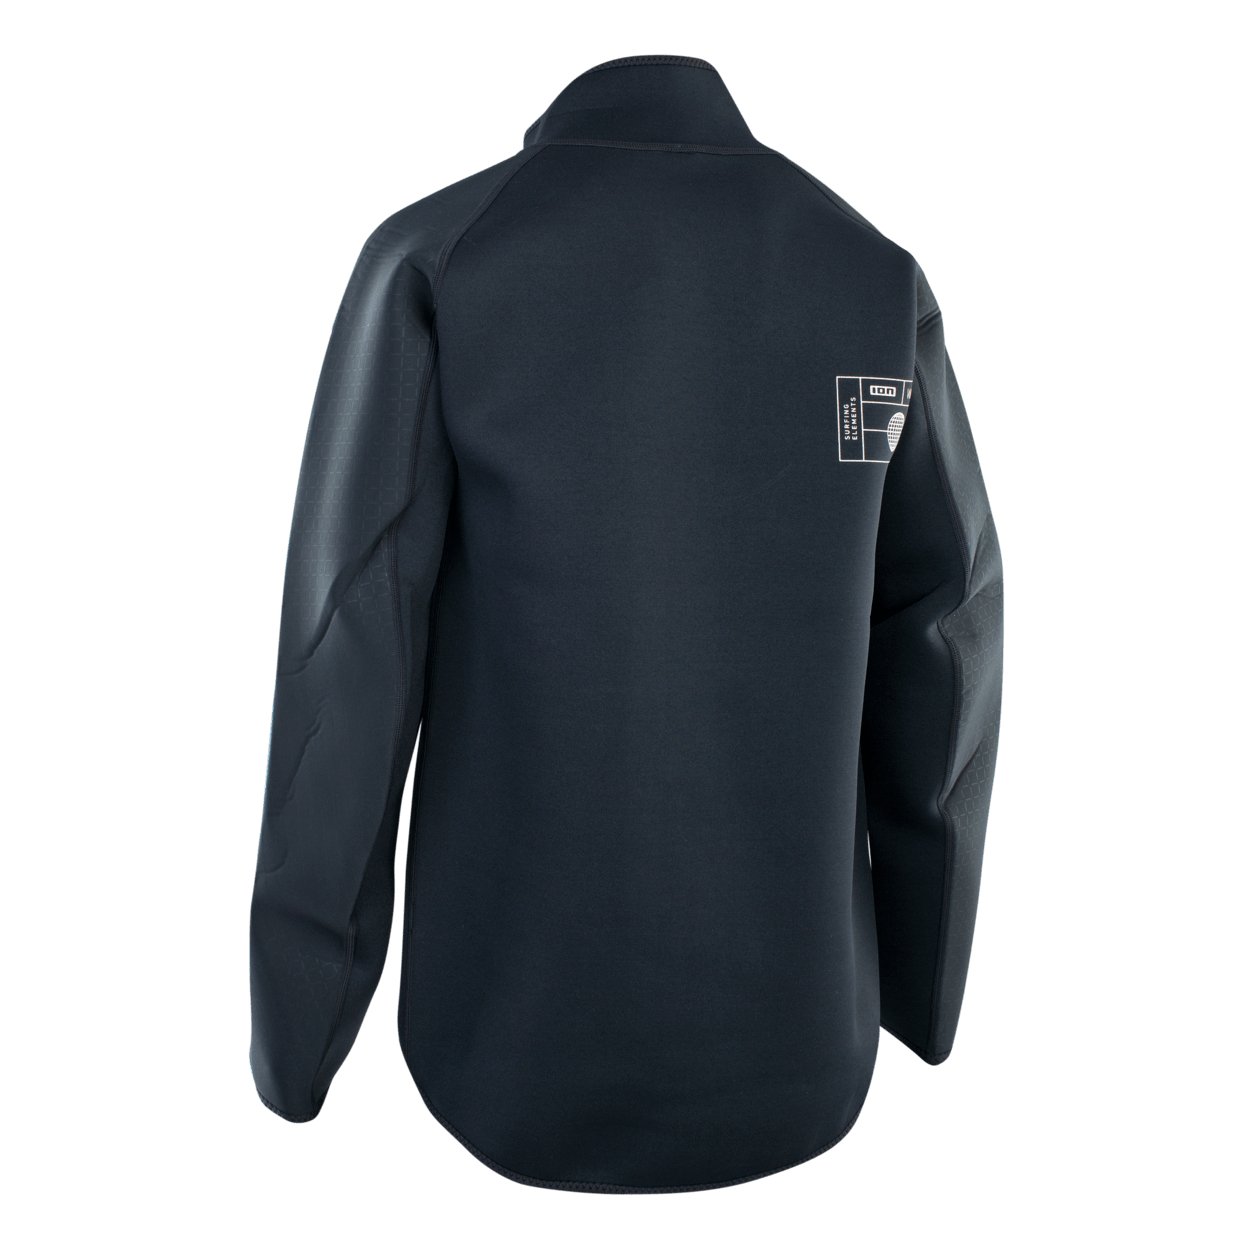 ION Neo Cruise Jacket men 2022 - Worthing Watersports - 9010583052830 - Tops - ION Water